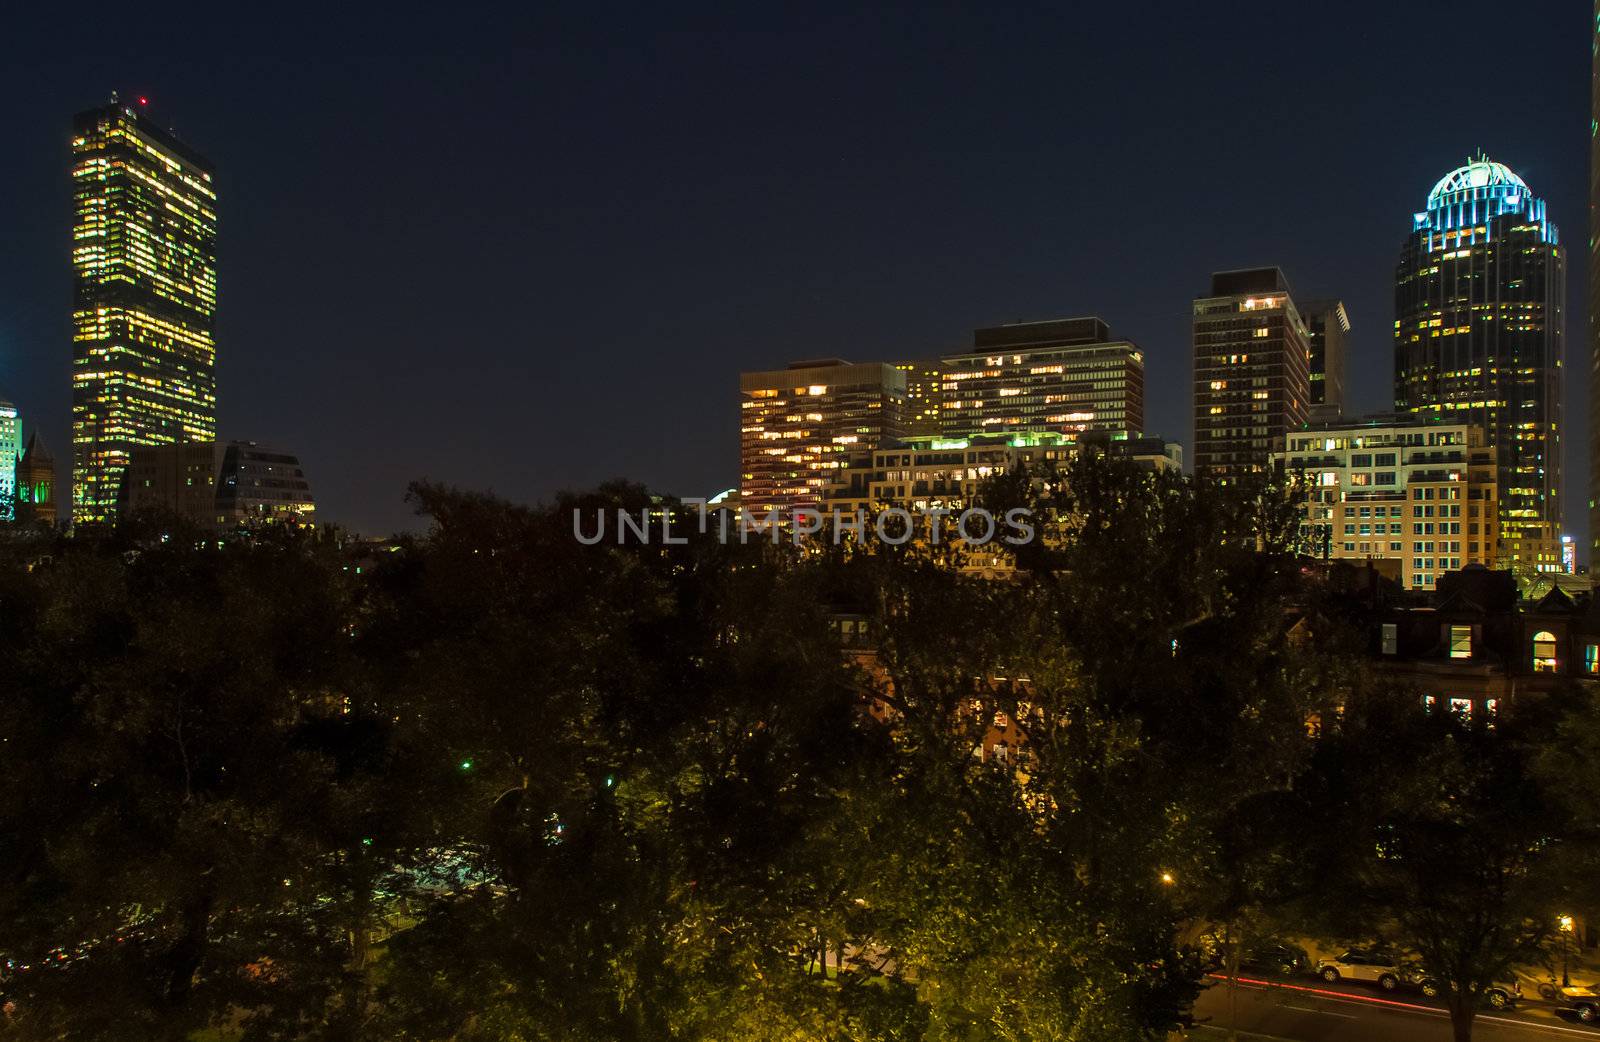 View of Boston's Back Bay skyline at night